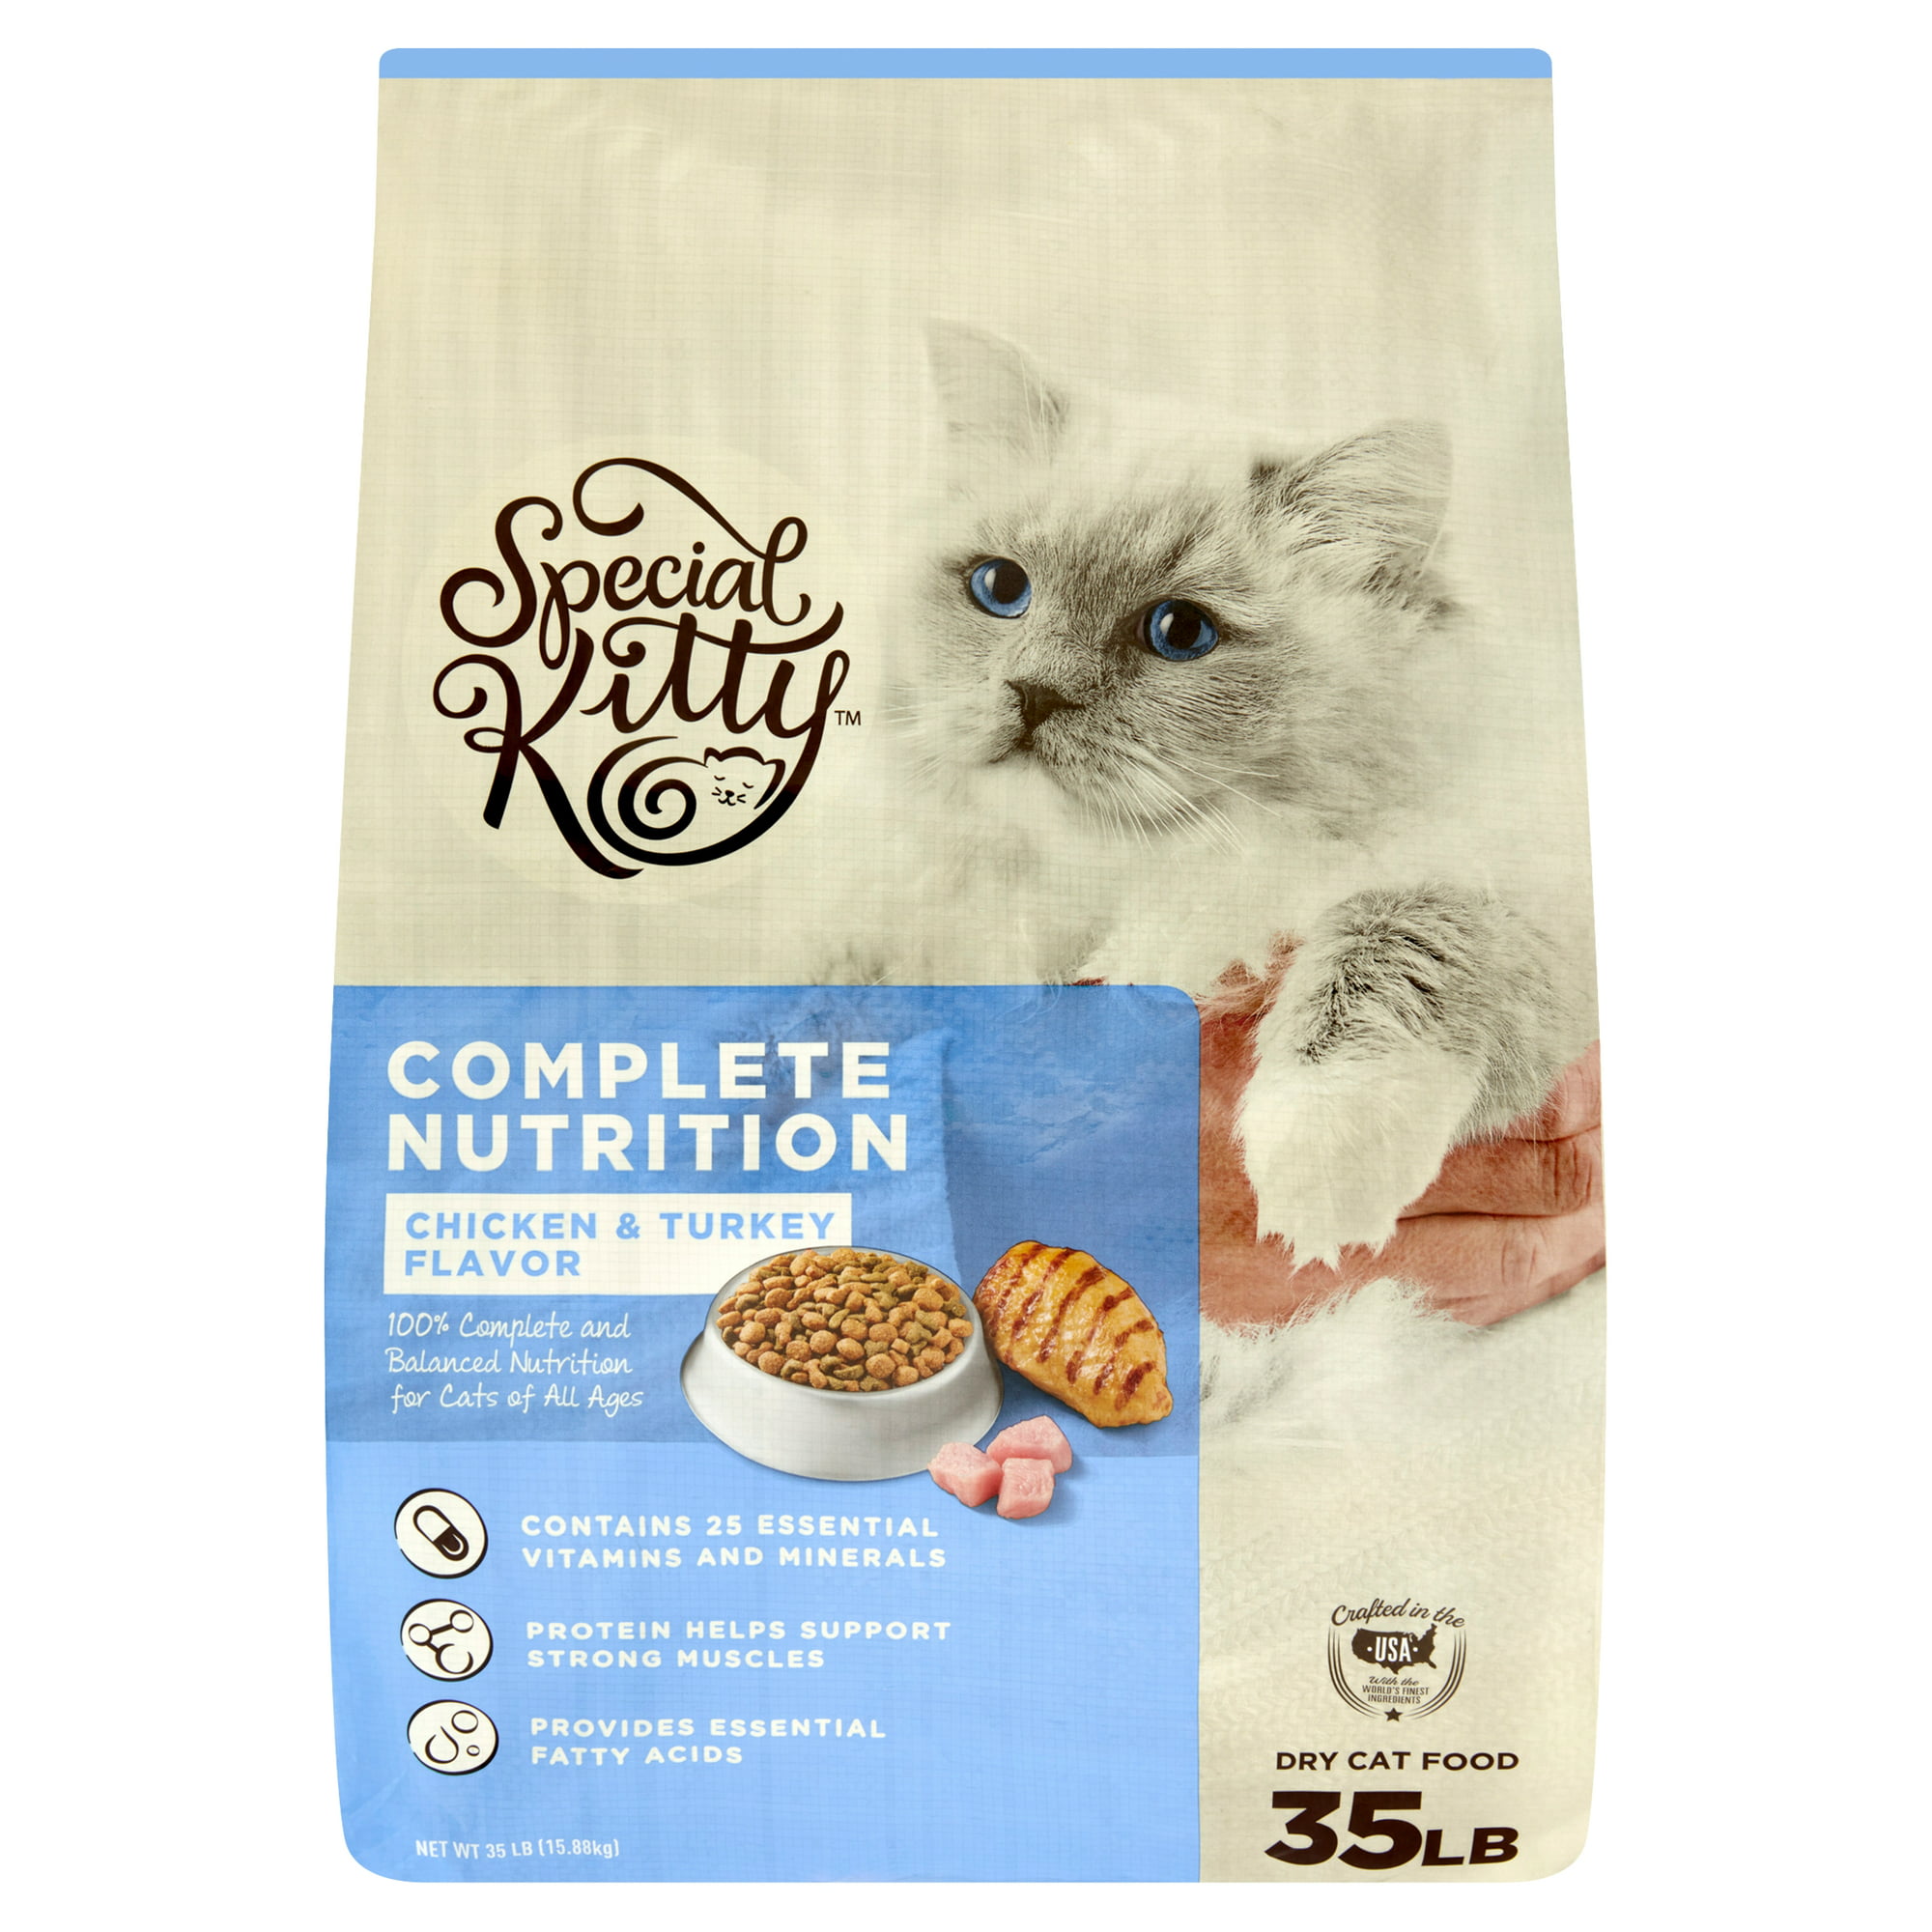 Special Kitty Dry Cat Food: 44-lbs Outdoor Formula (Chicken) $28.75, 35-lbs Complete Nutrition (Chicken & Turkey) $23.85 + Free Shipping w/ Walmart+ or $35+